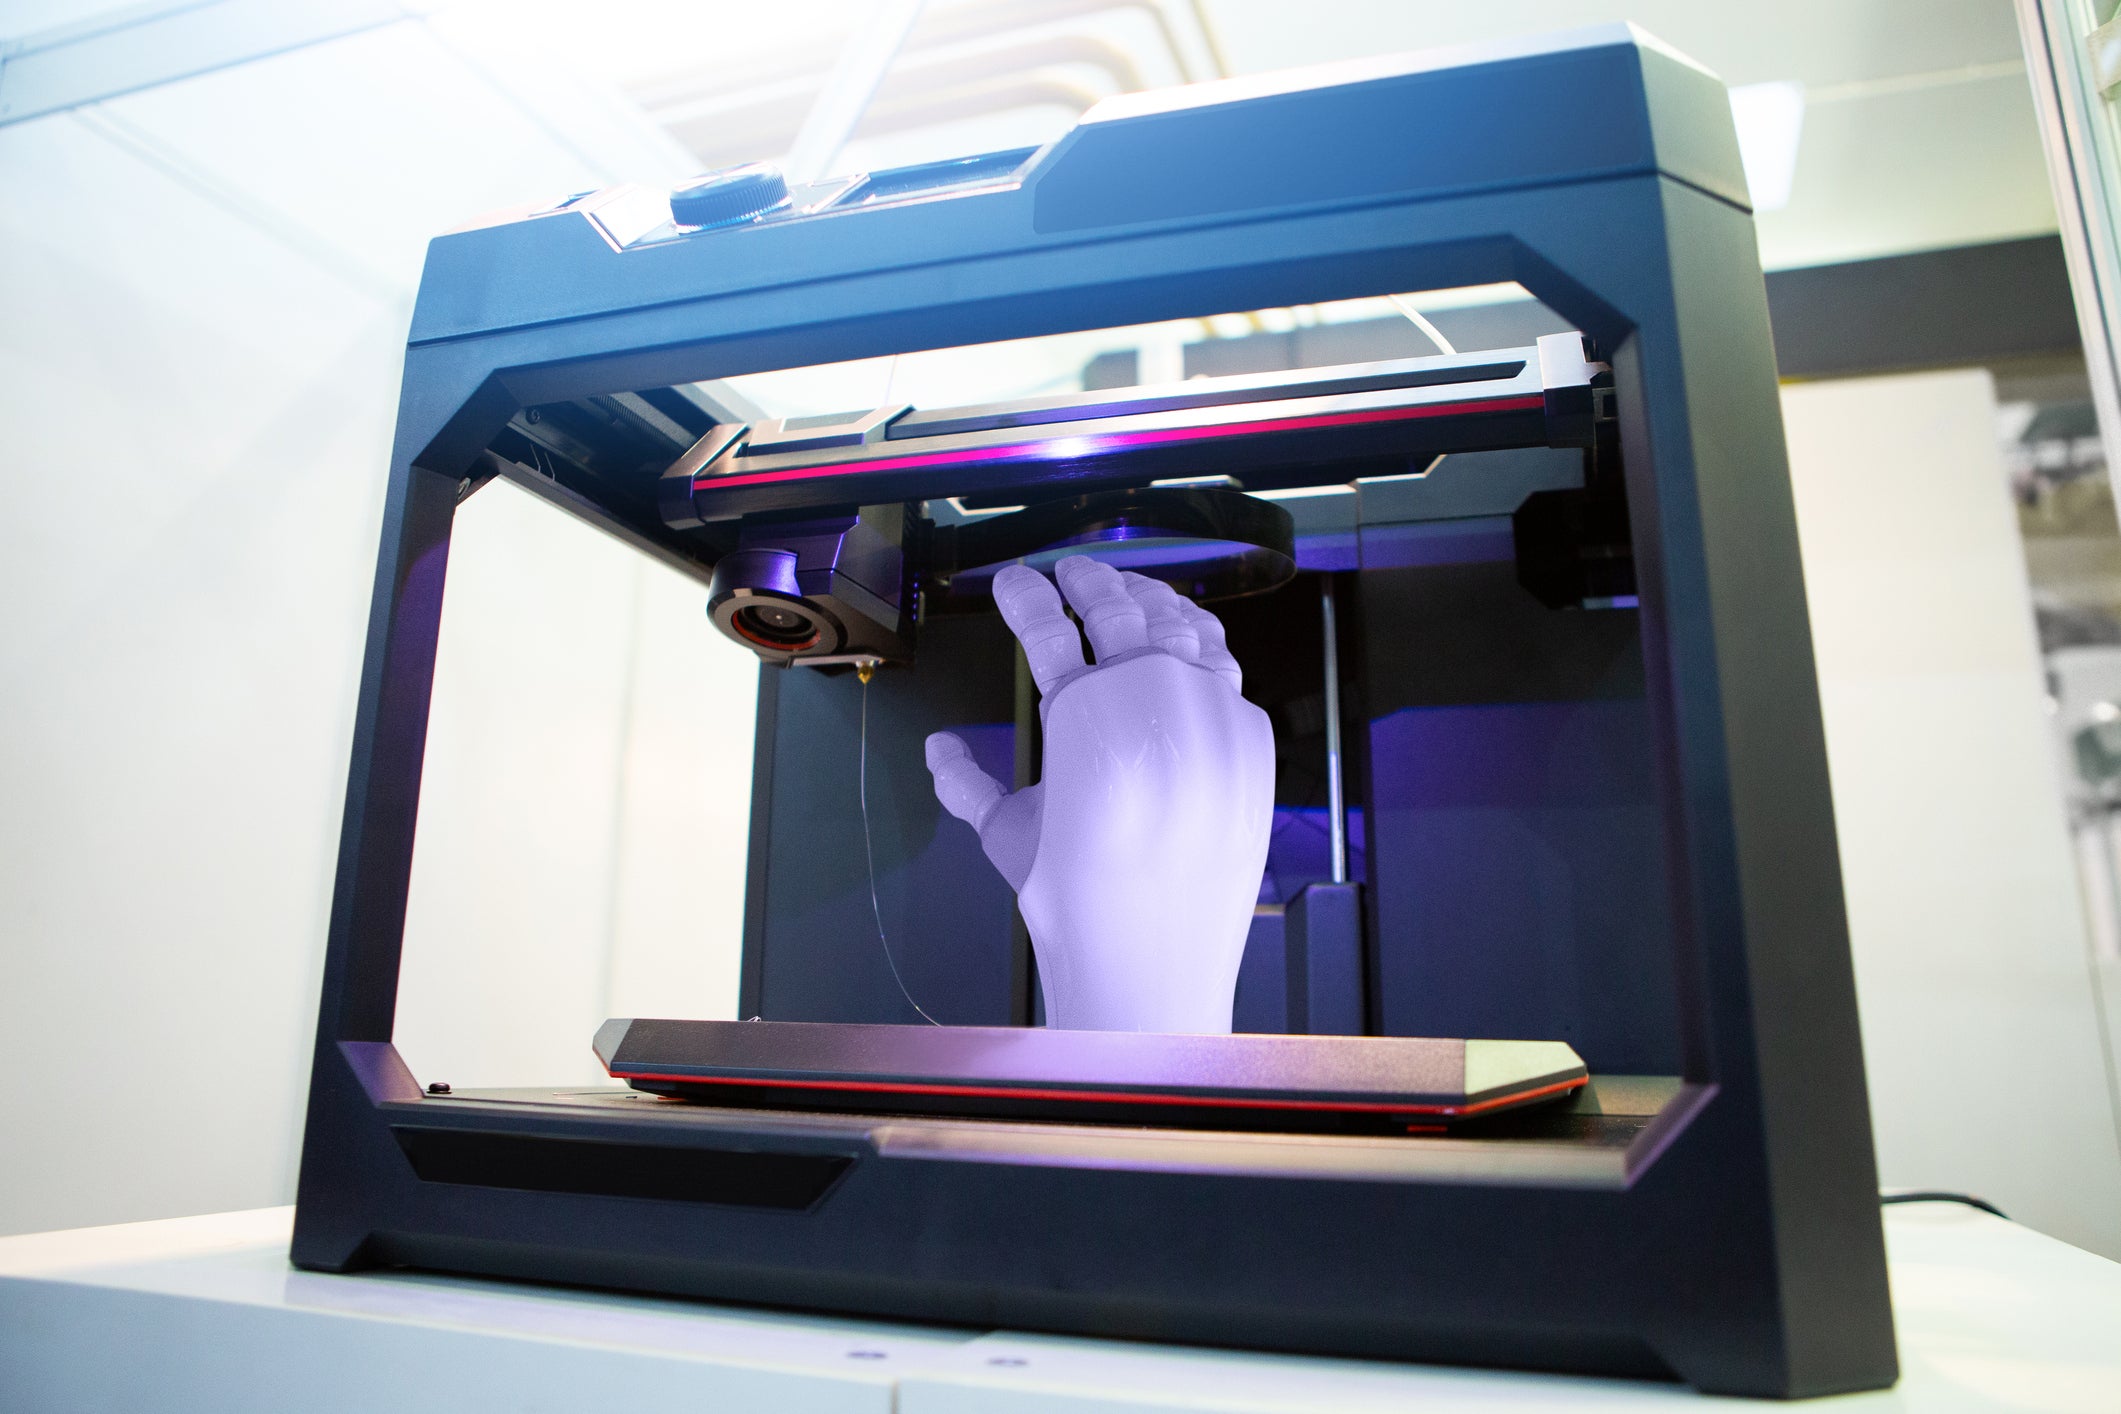 A customized match?  3D printing for prosthetic limbs